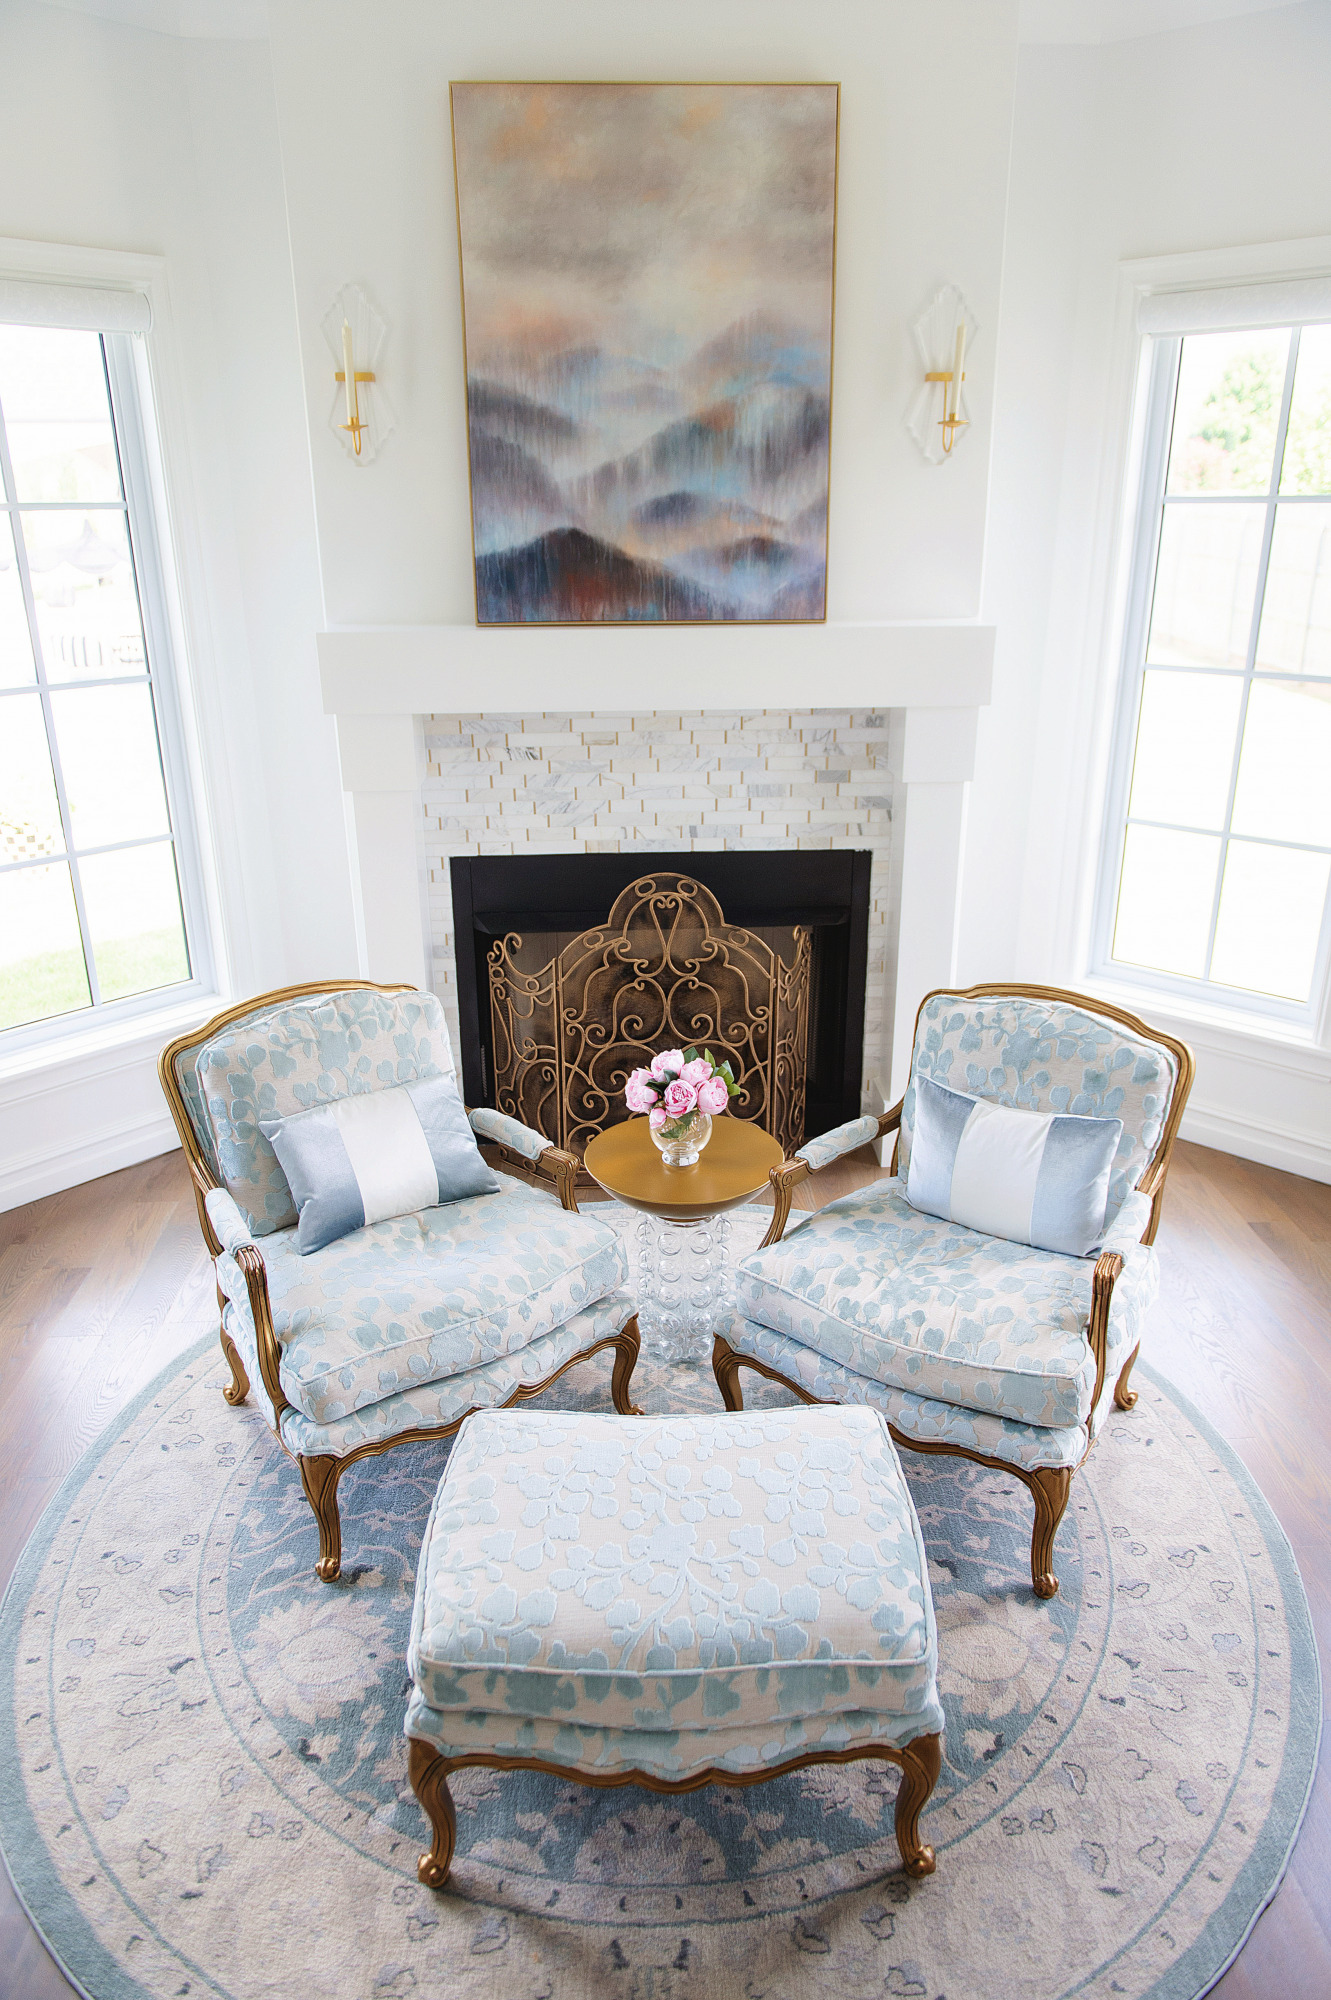 Blog Design by popular US lifestyle blog, The Sweetest Thing: image of a sitting nook with a blue and white print round rug, matching blue and cream arm chairs, and a fireplace with a gold grate. 